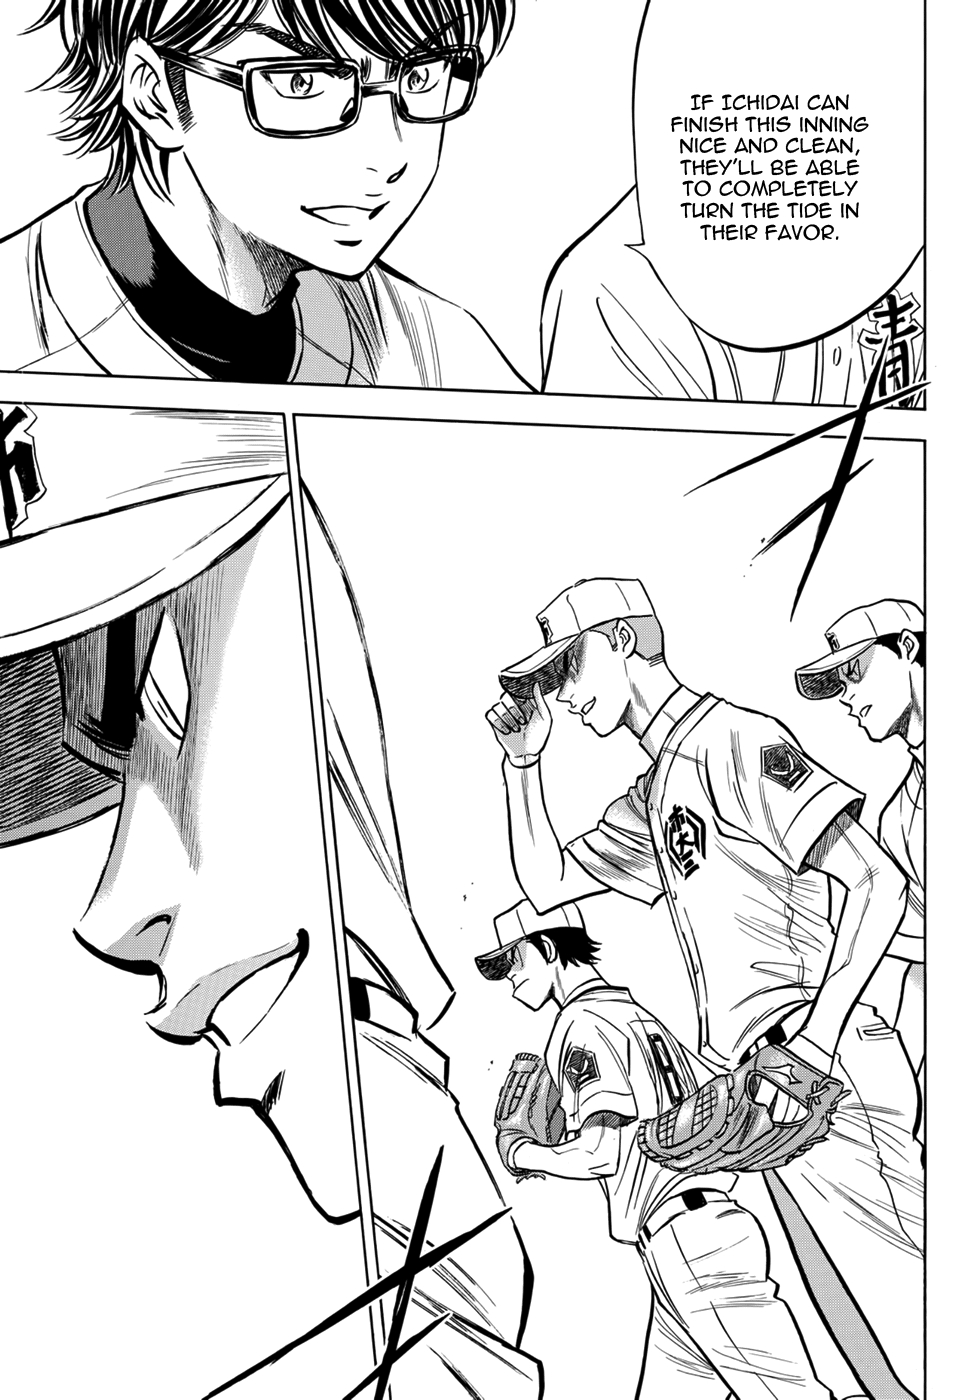 Diamond no Ace Act II Vol. 4 Ch. 31 The Other Places' Aces